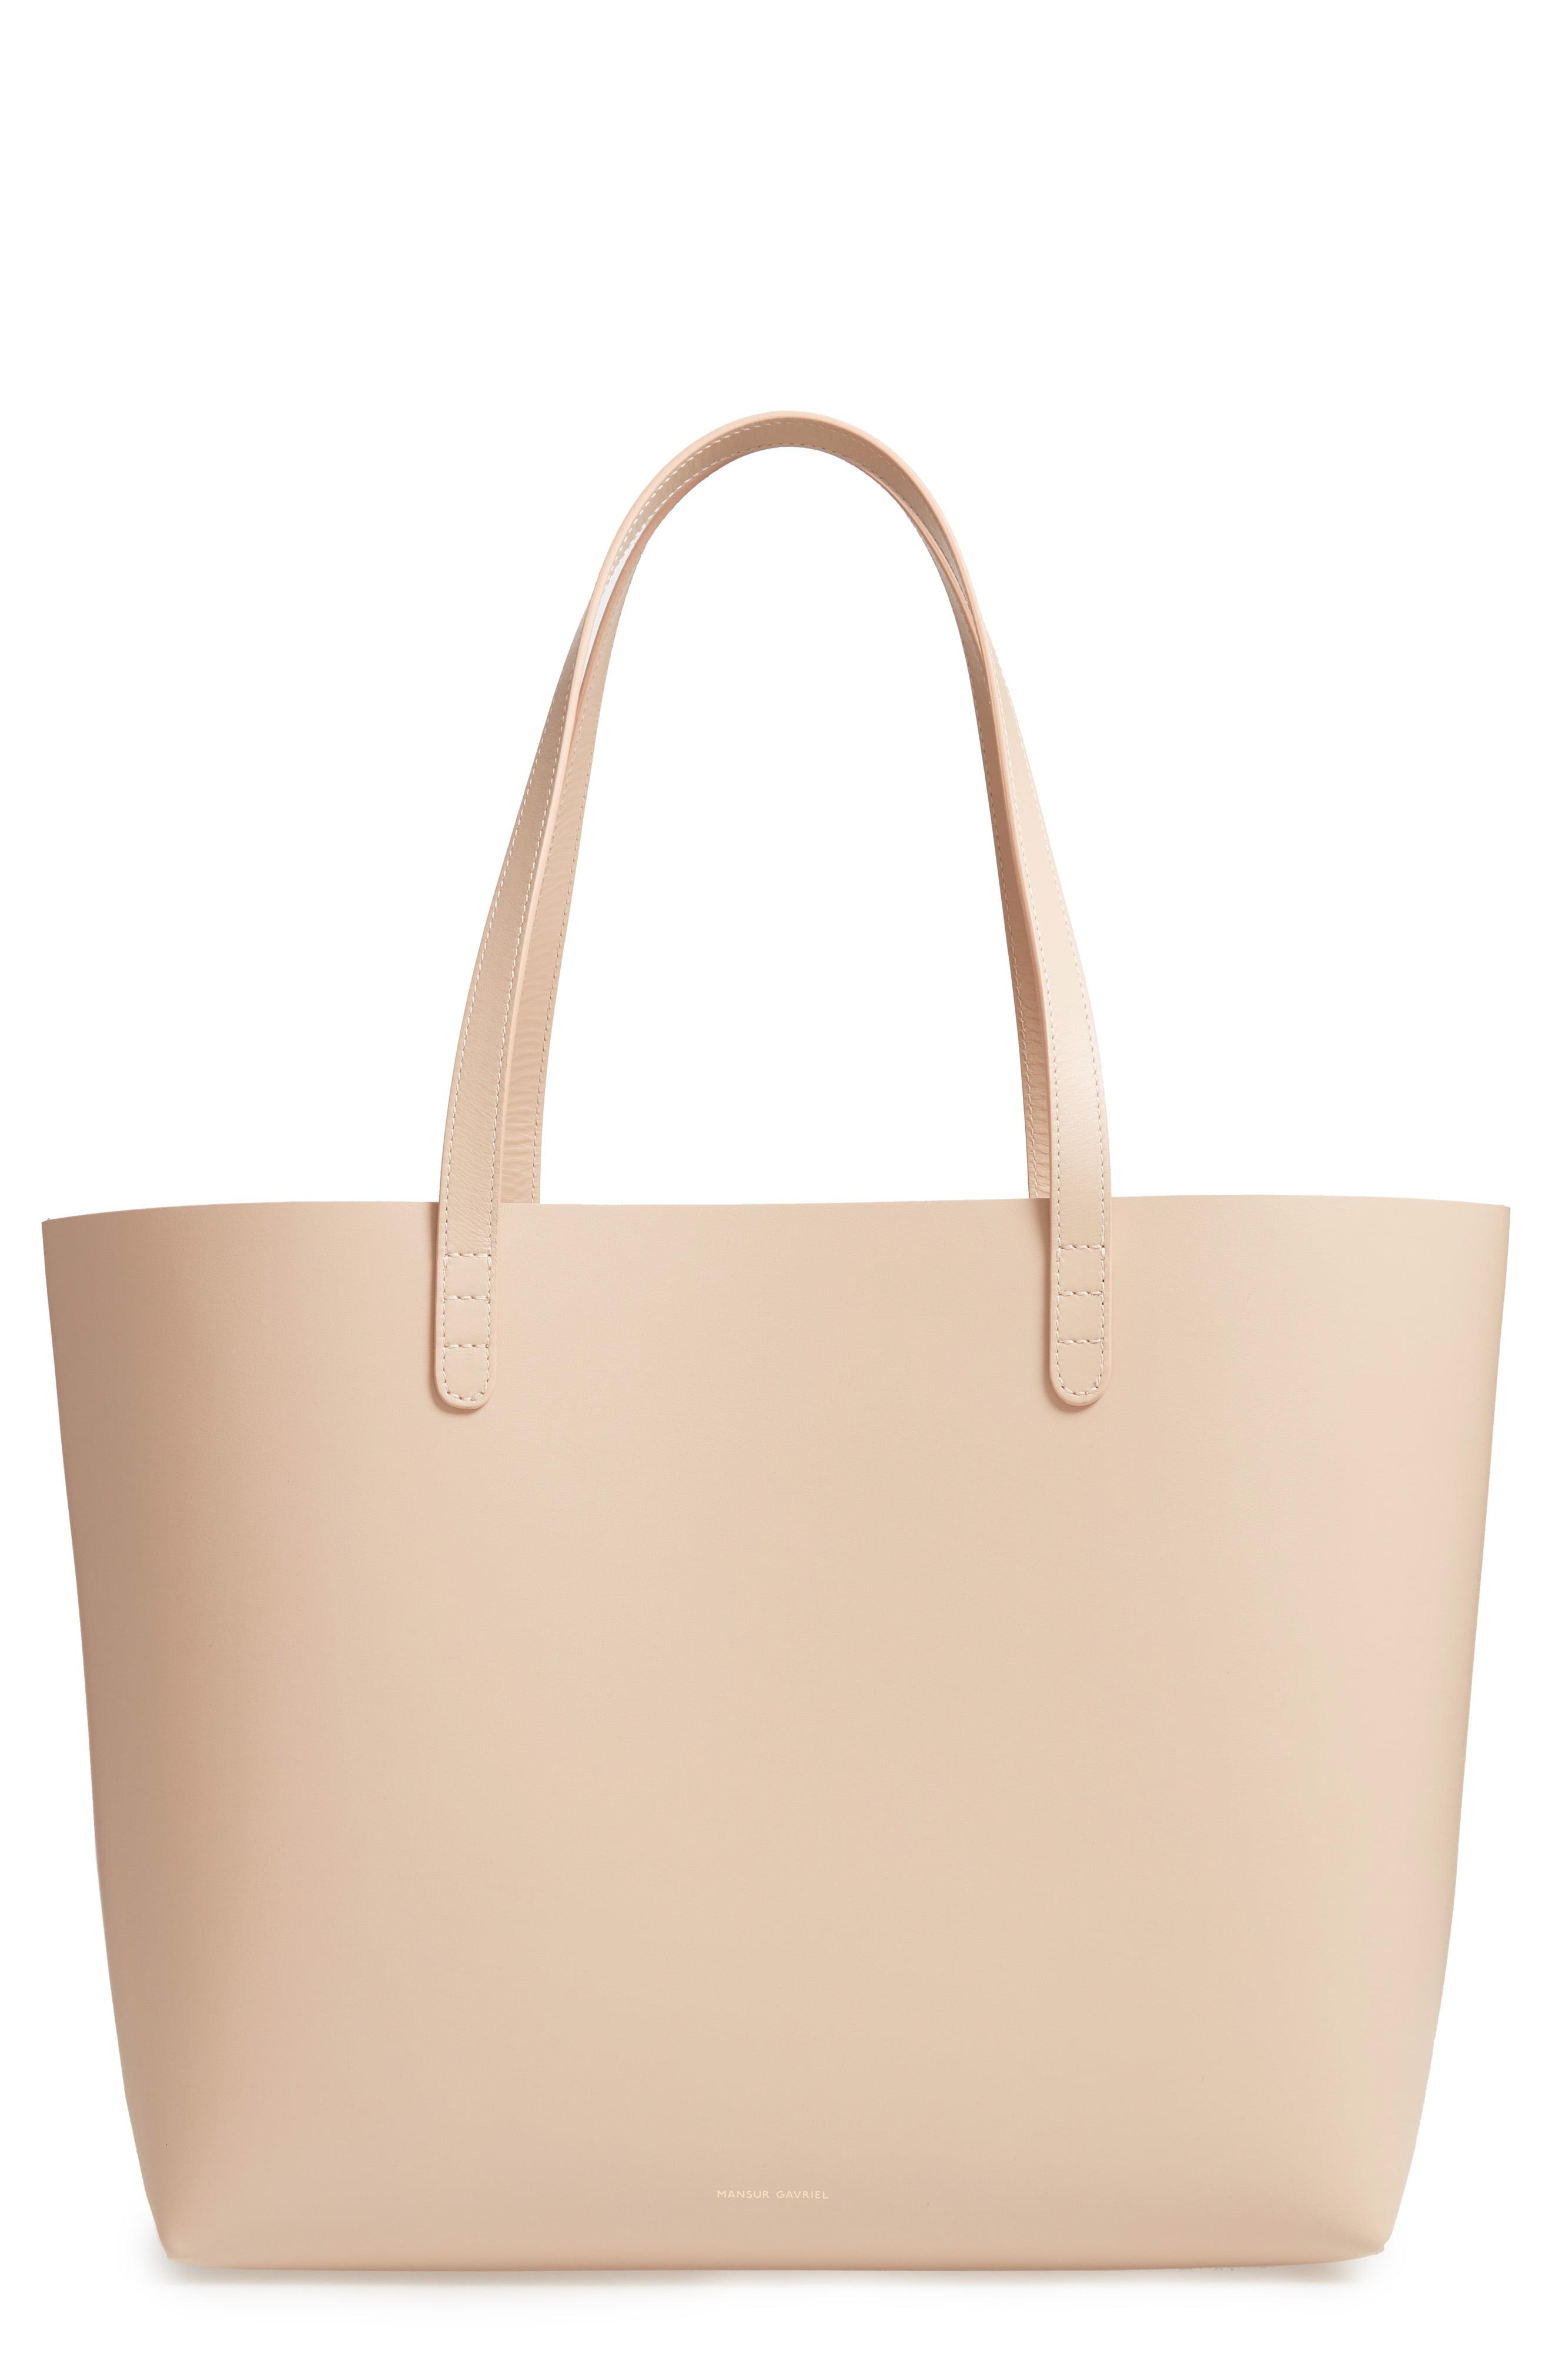 Mansur Gavriel Large Leather Tote in Green - Lyst